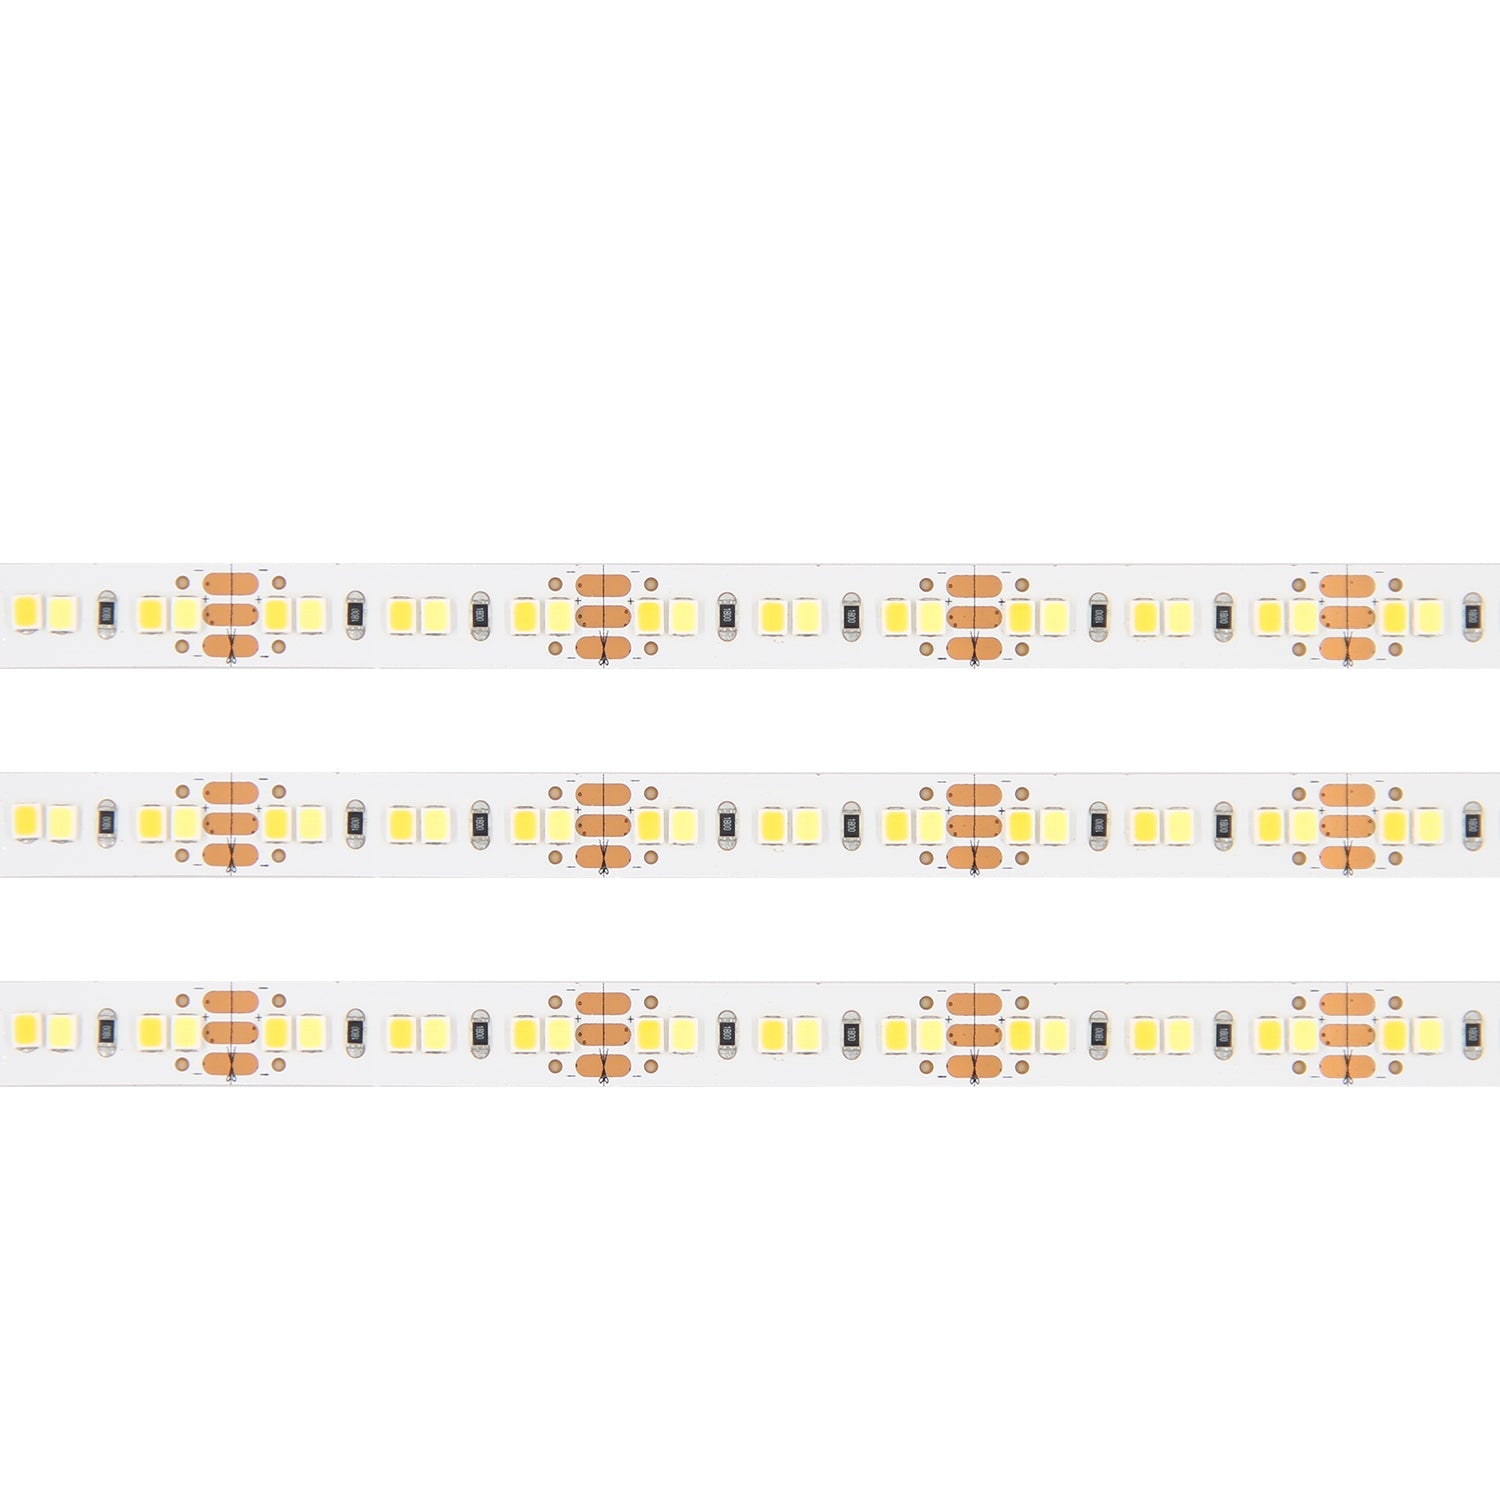 Send an inquiry for 12V Flexible Cabinet Tape Lighting Width 10mm Multi Color LED Ribbon Light with CE for House Decor 5M/Roll to high quality Cabinet Tape Lighting supplier. Wholesale LED Ribbon Light directly from China Cabinet Tape Lighting manufacturers/exporters. Get a factory sale price list and become a distributor/agent-vstled.com